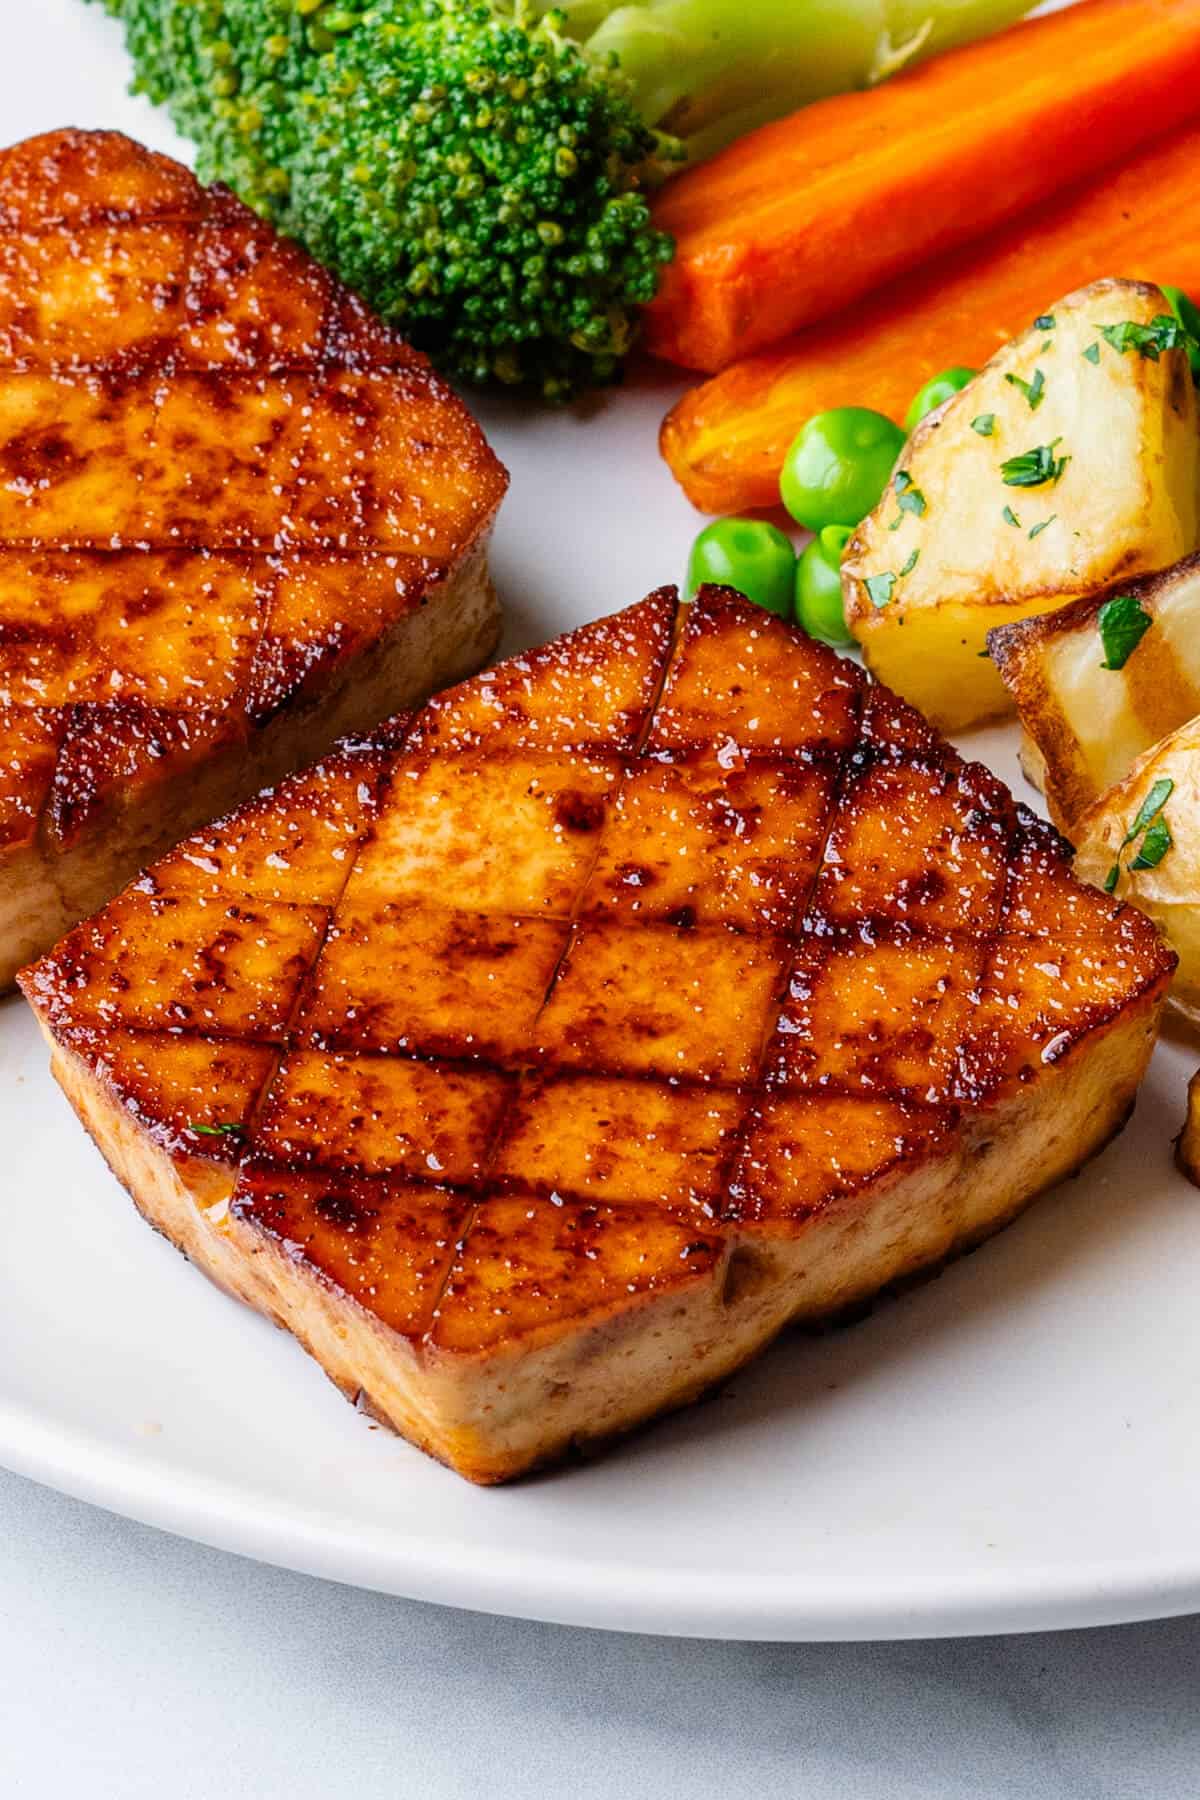 Tofu steaks on a plate with a side of vegetables